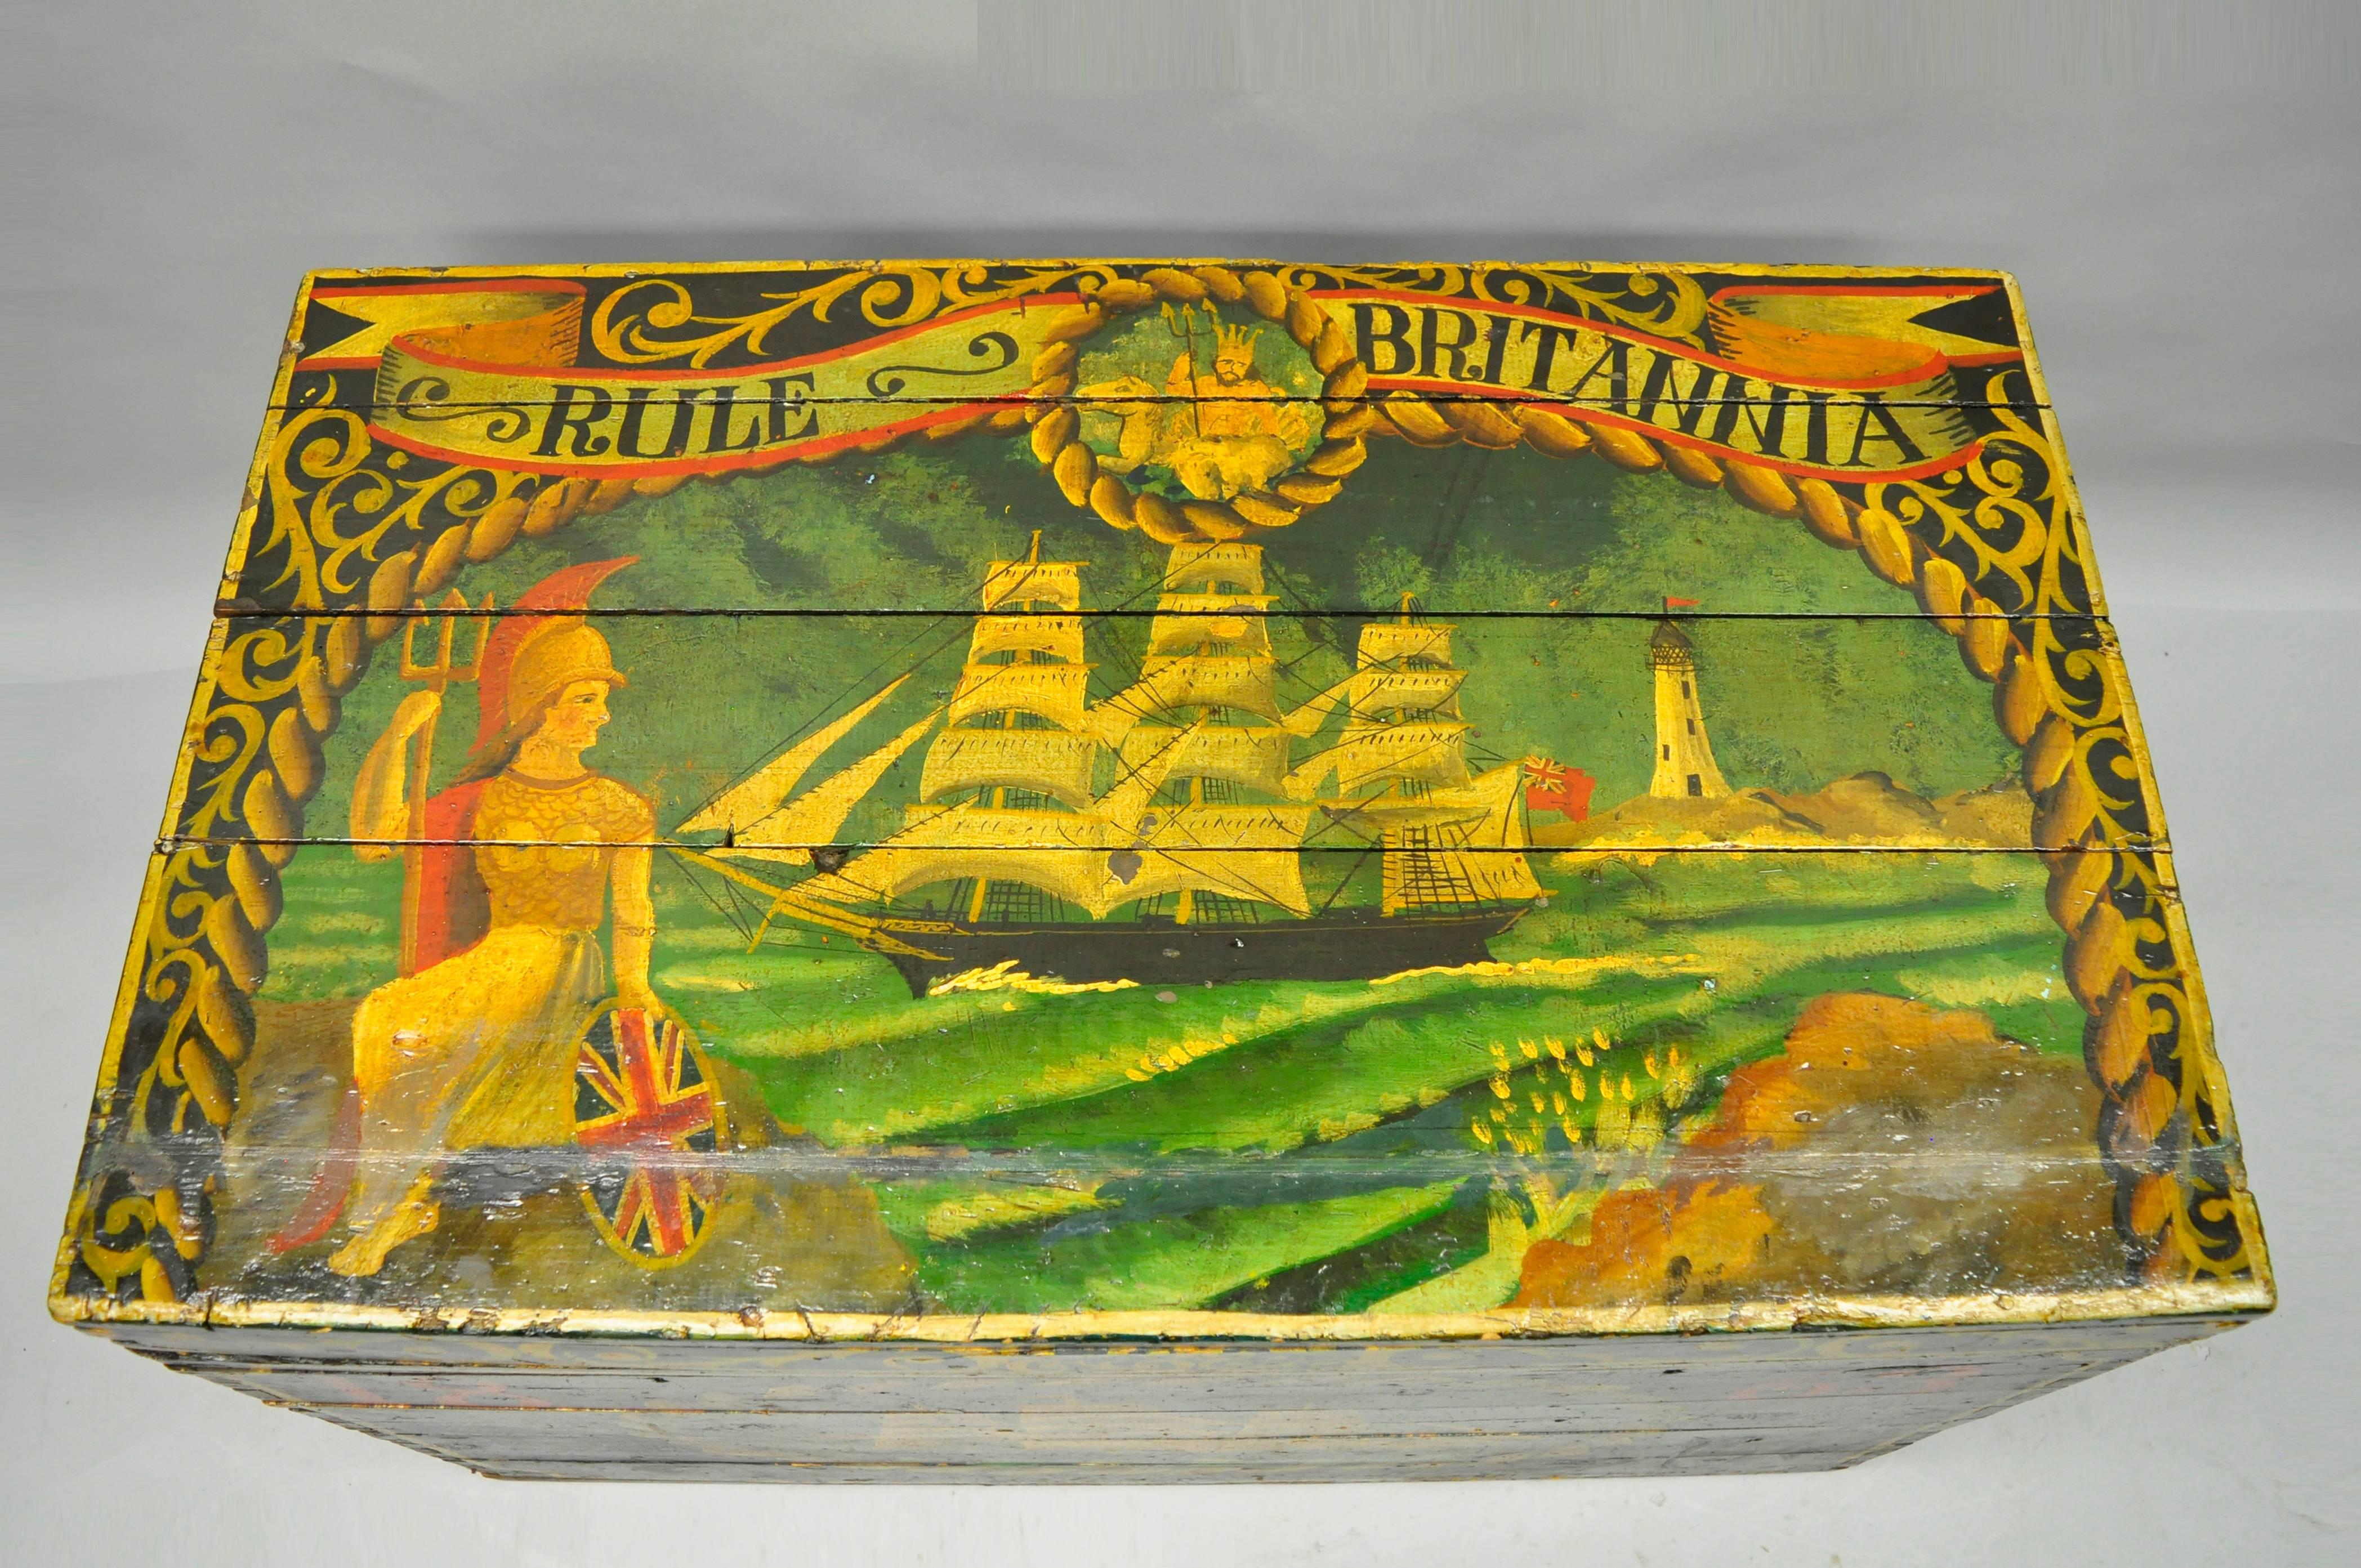 Solid wood English painted trunk with dovetail joinery and depictions of the British tea clipper ship Taitsing. Trunk is finished in green, gold, and red with the top, face, and sides having various depictions and text. 
Top reads 